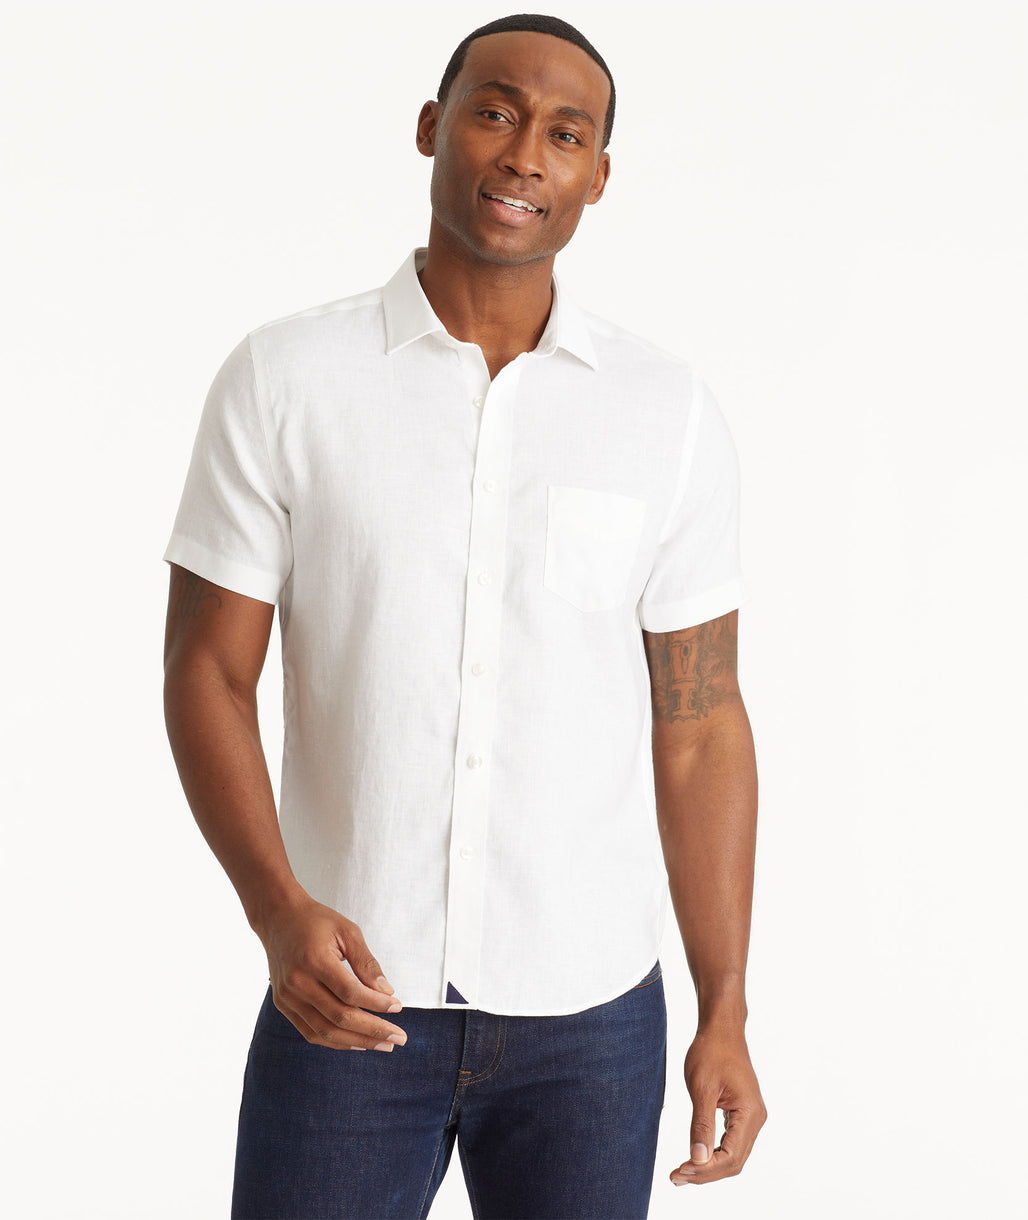 Model wearing an UNTUCKit Bright White Wrinkle-Resistant Linen Short-Sleeve Cameron Shirt